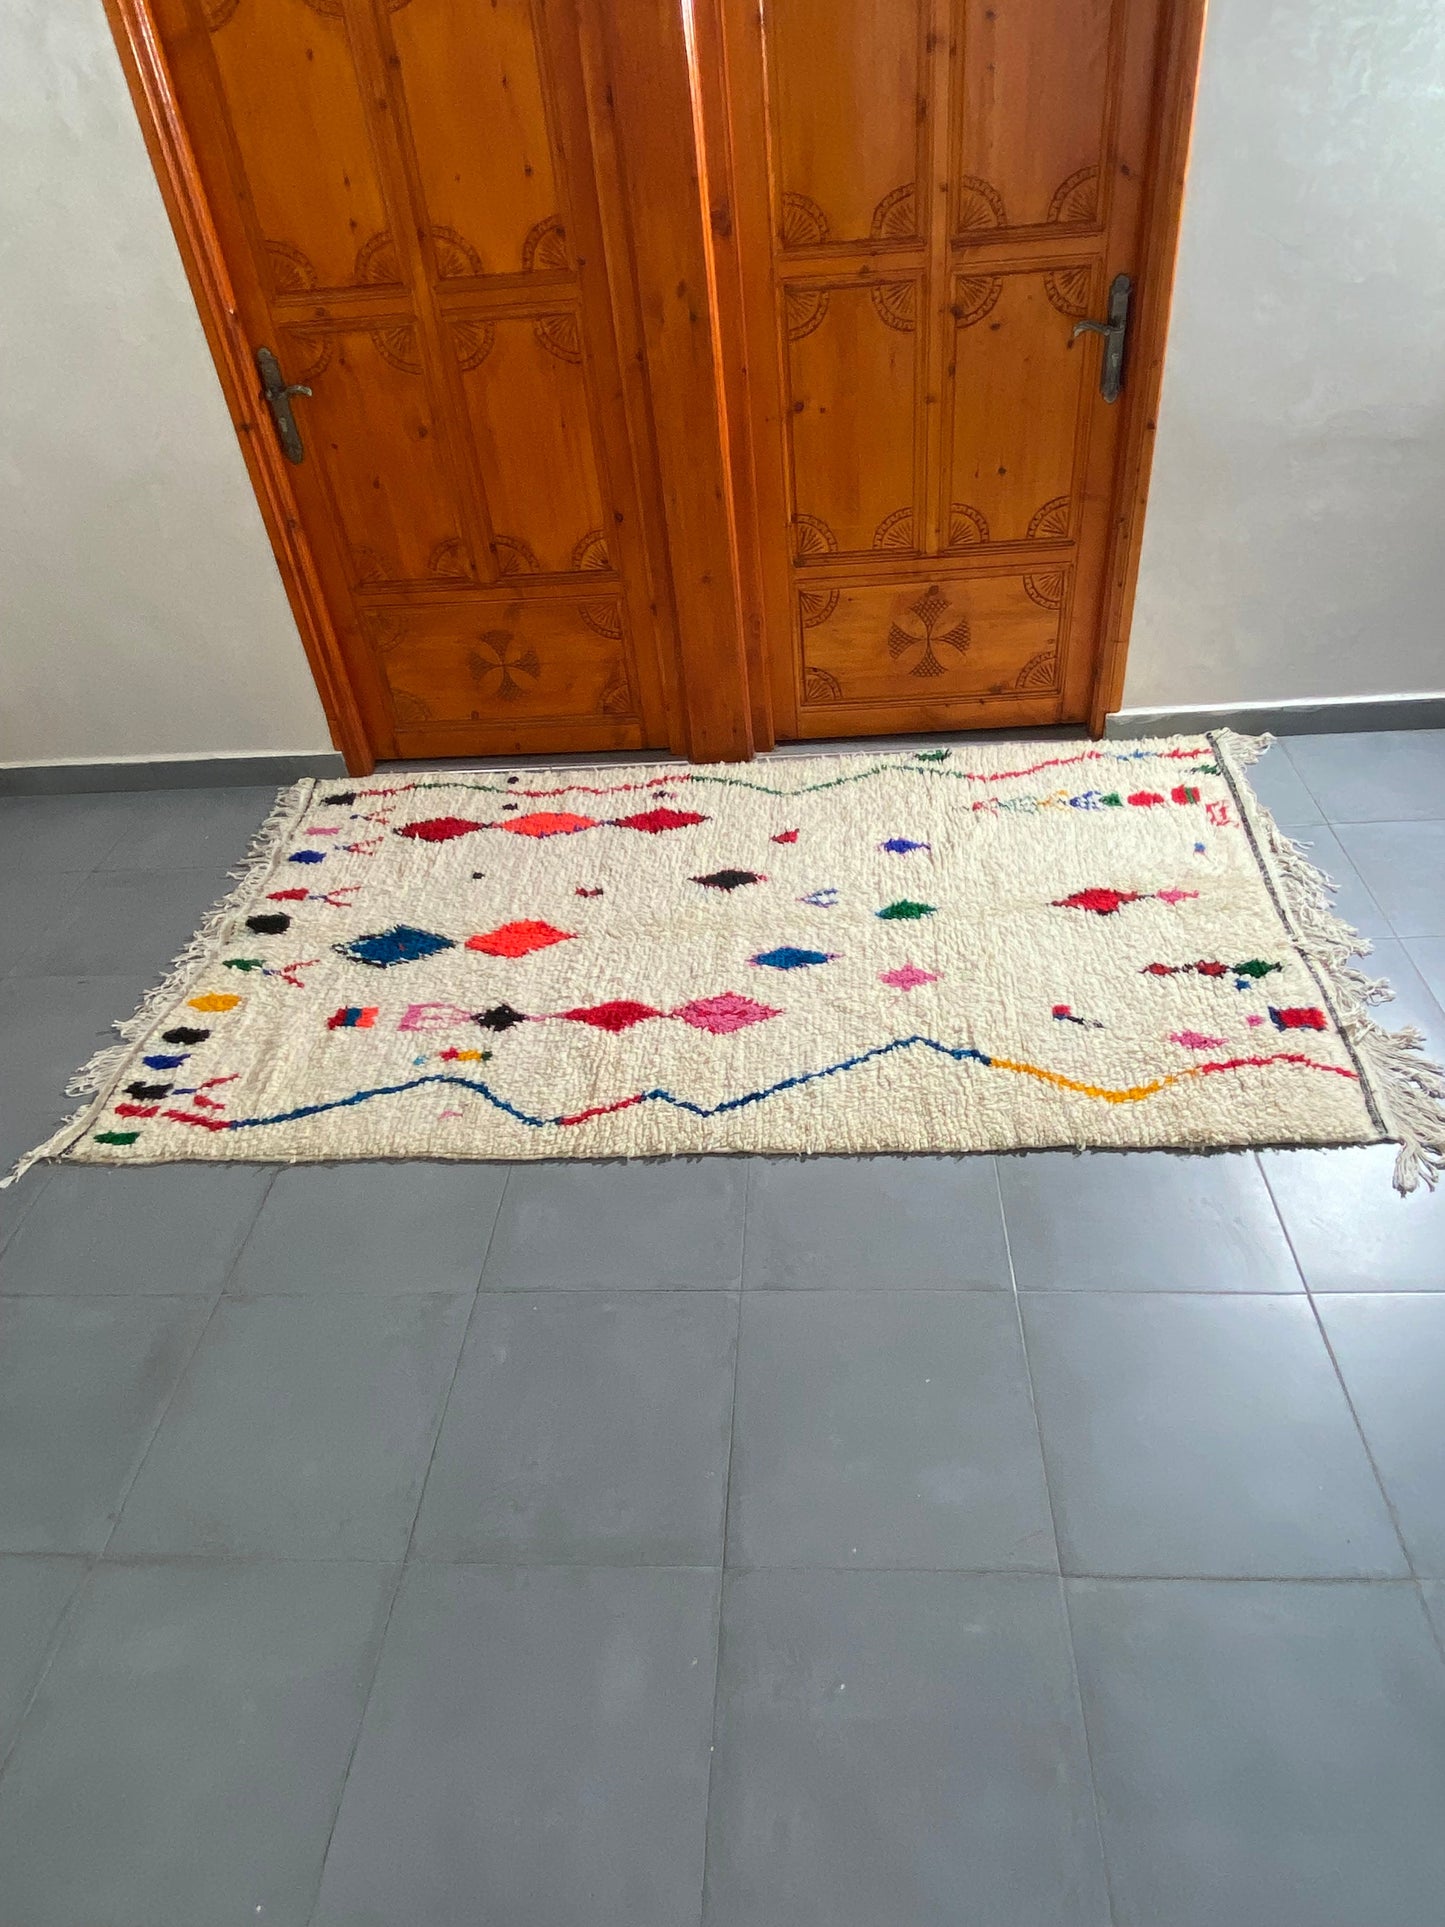 Azilal Carpets are traditional handwoven rugs  rugs handmade hand woven rugs	 hand knotted wool rugrugs vintage size is 230x150 cm